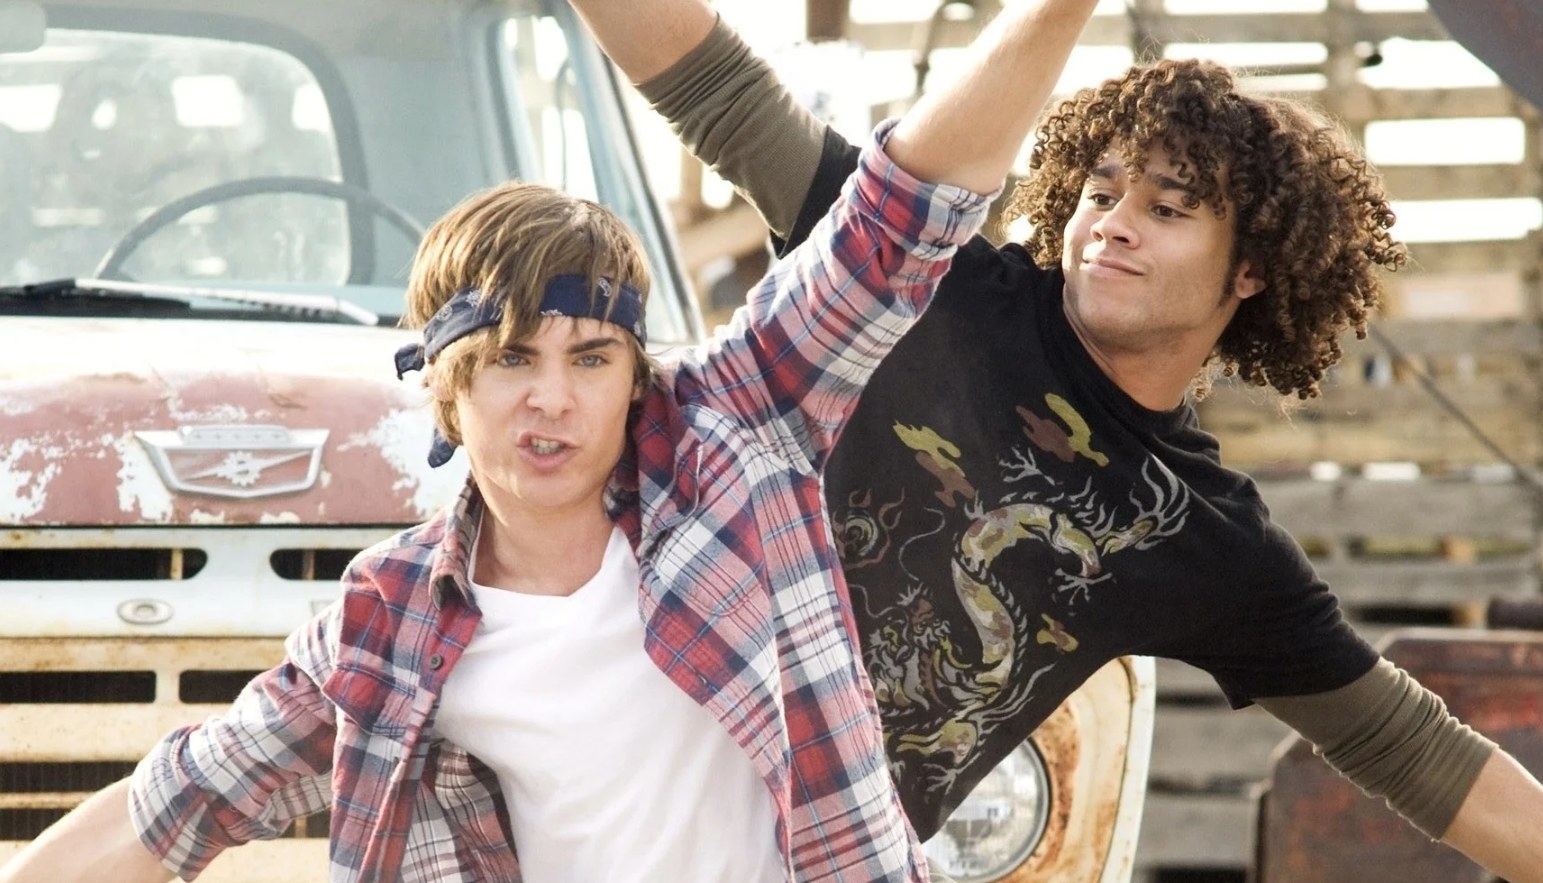 The Definitive Ranking Of Every Song From The High School Musical Trilogy